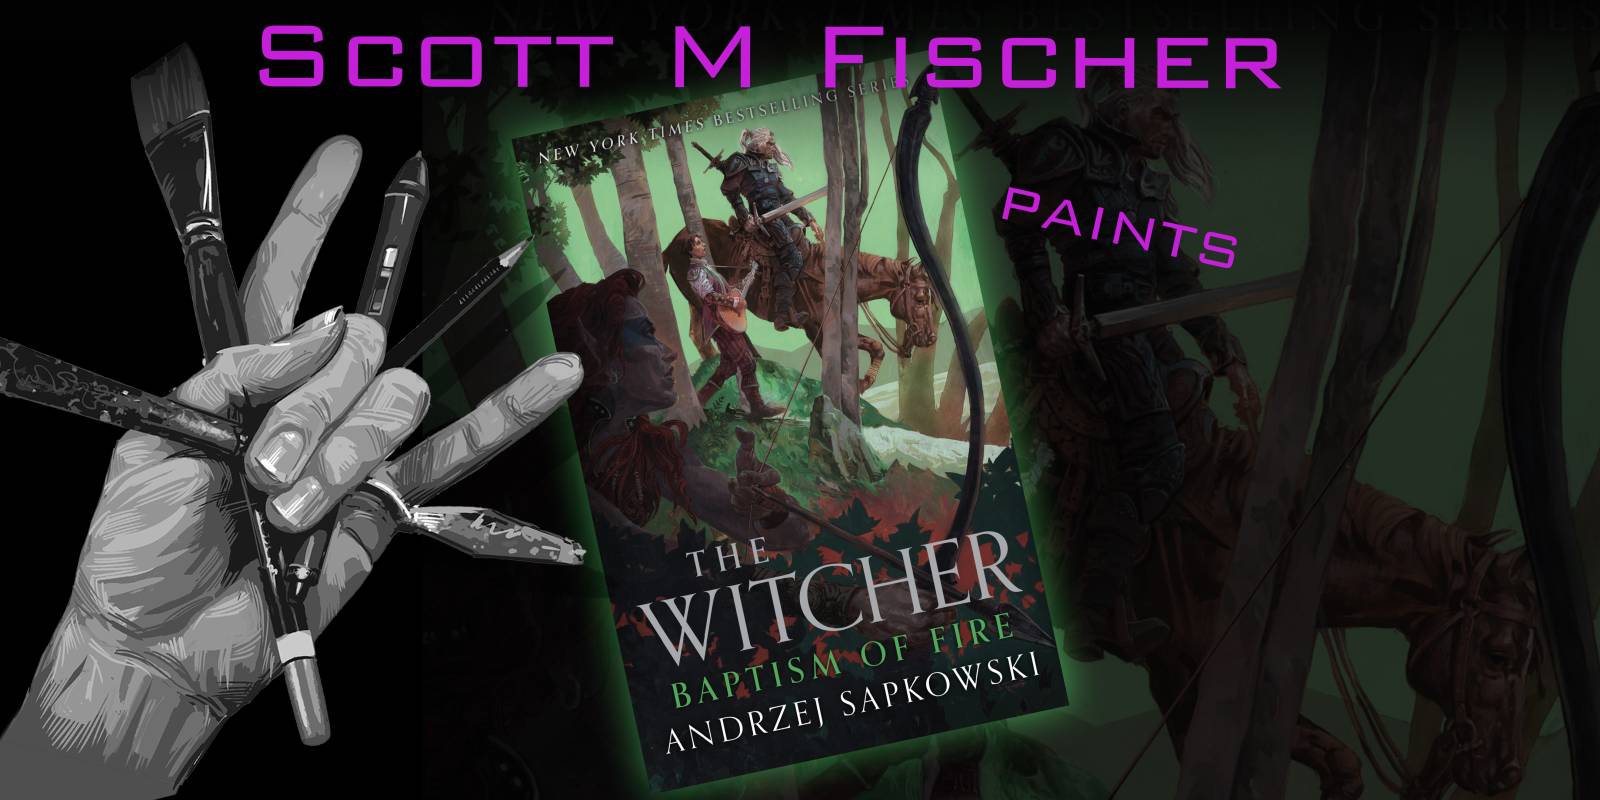 Fischer paints: Witcher- Baptism of Fire novel cover!